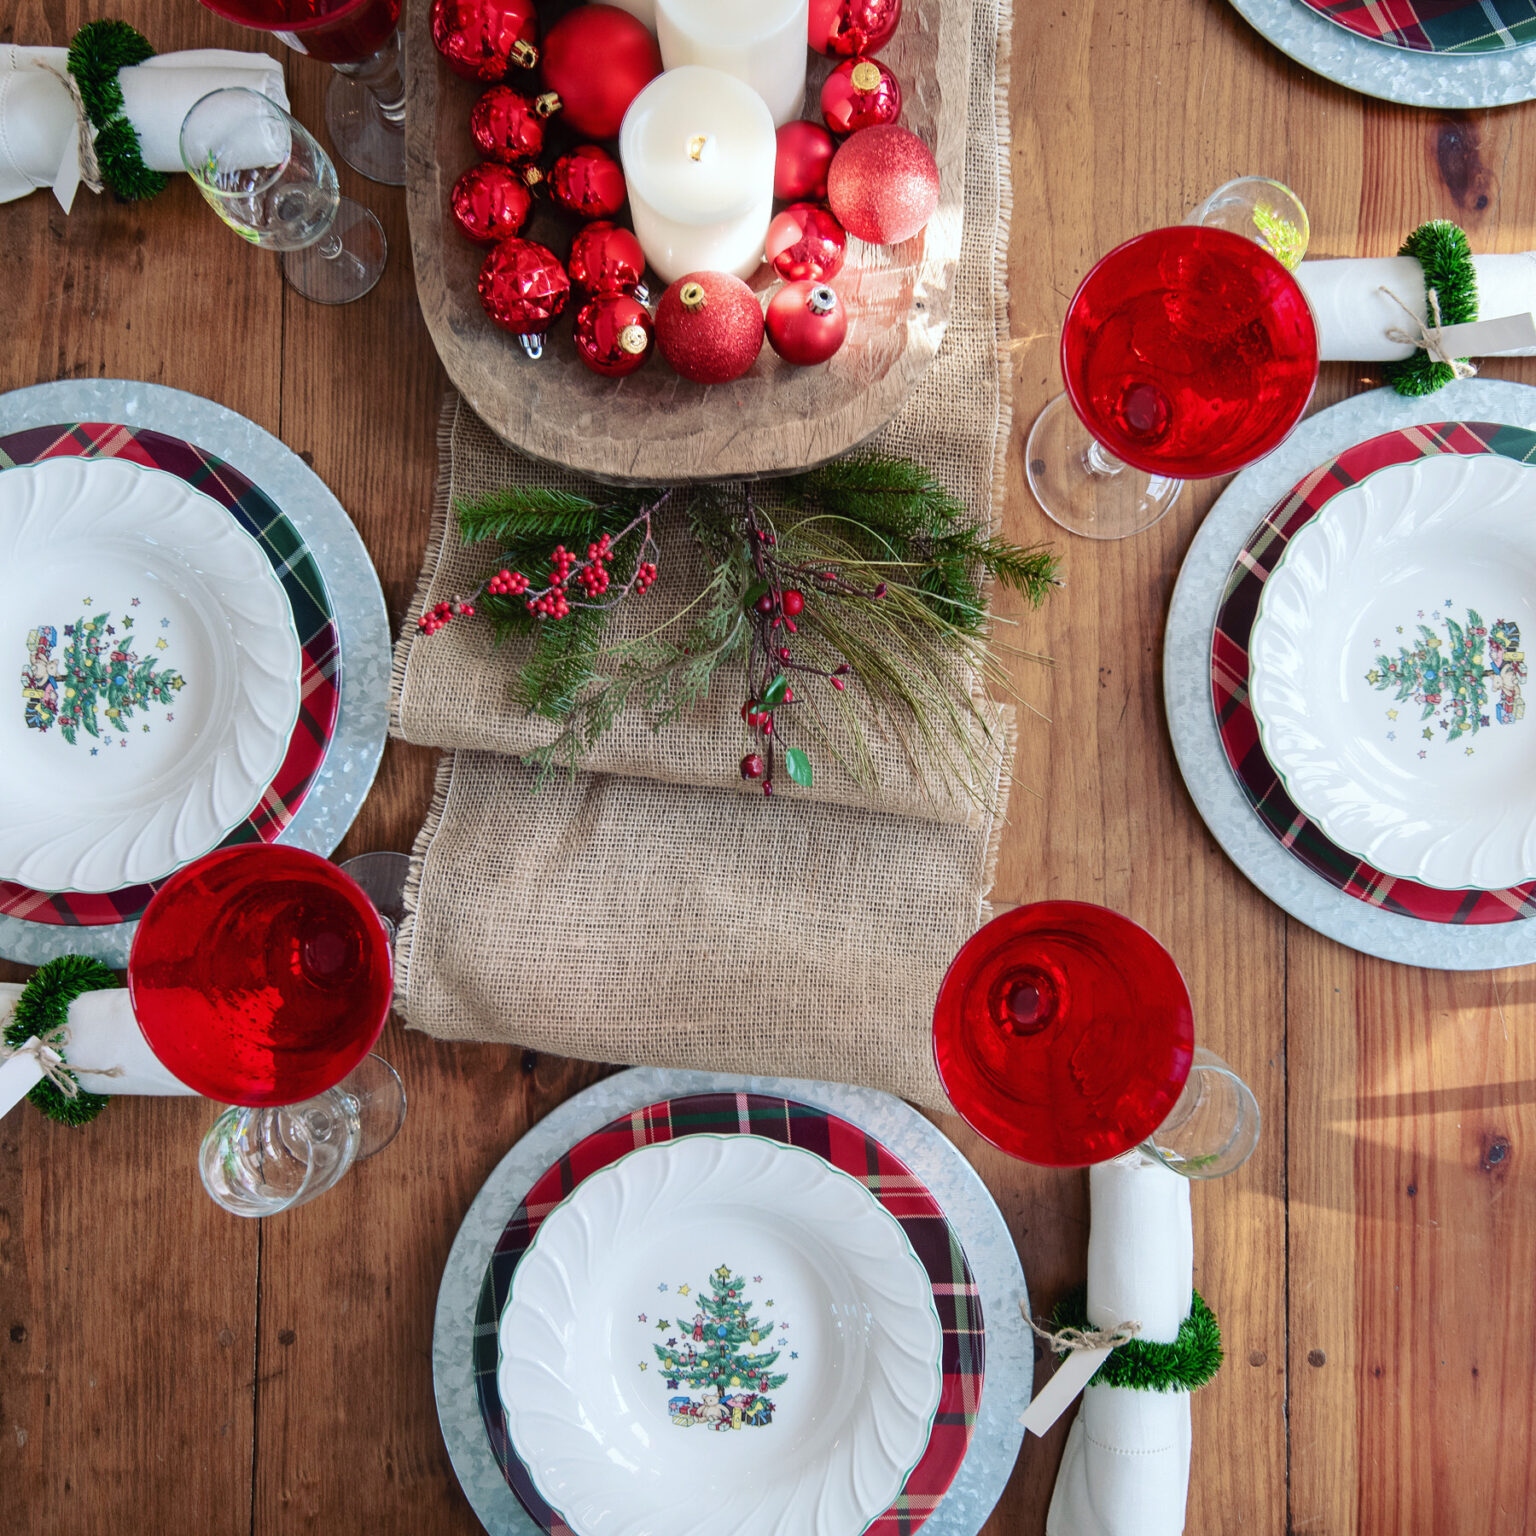 3 Simple Christmas Table Looks for the Holidays ⋆ The Old Barn